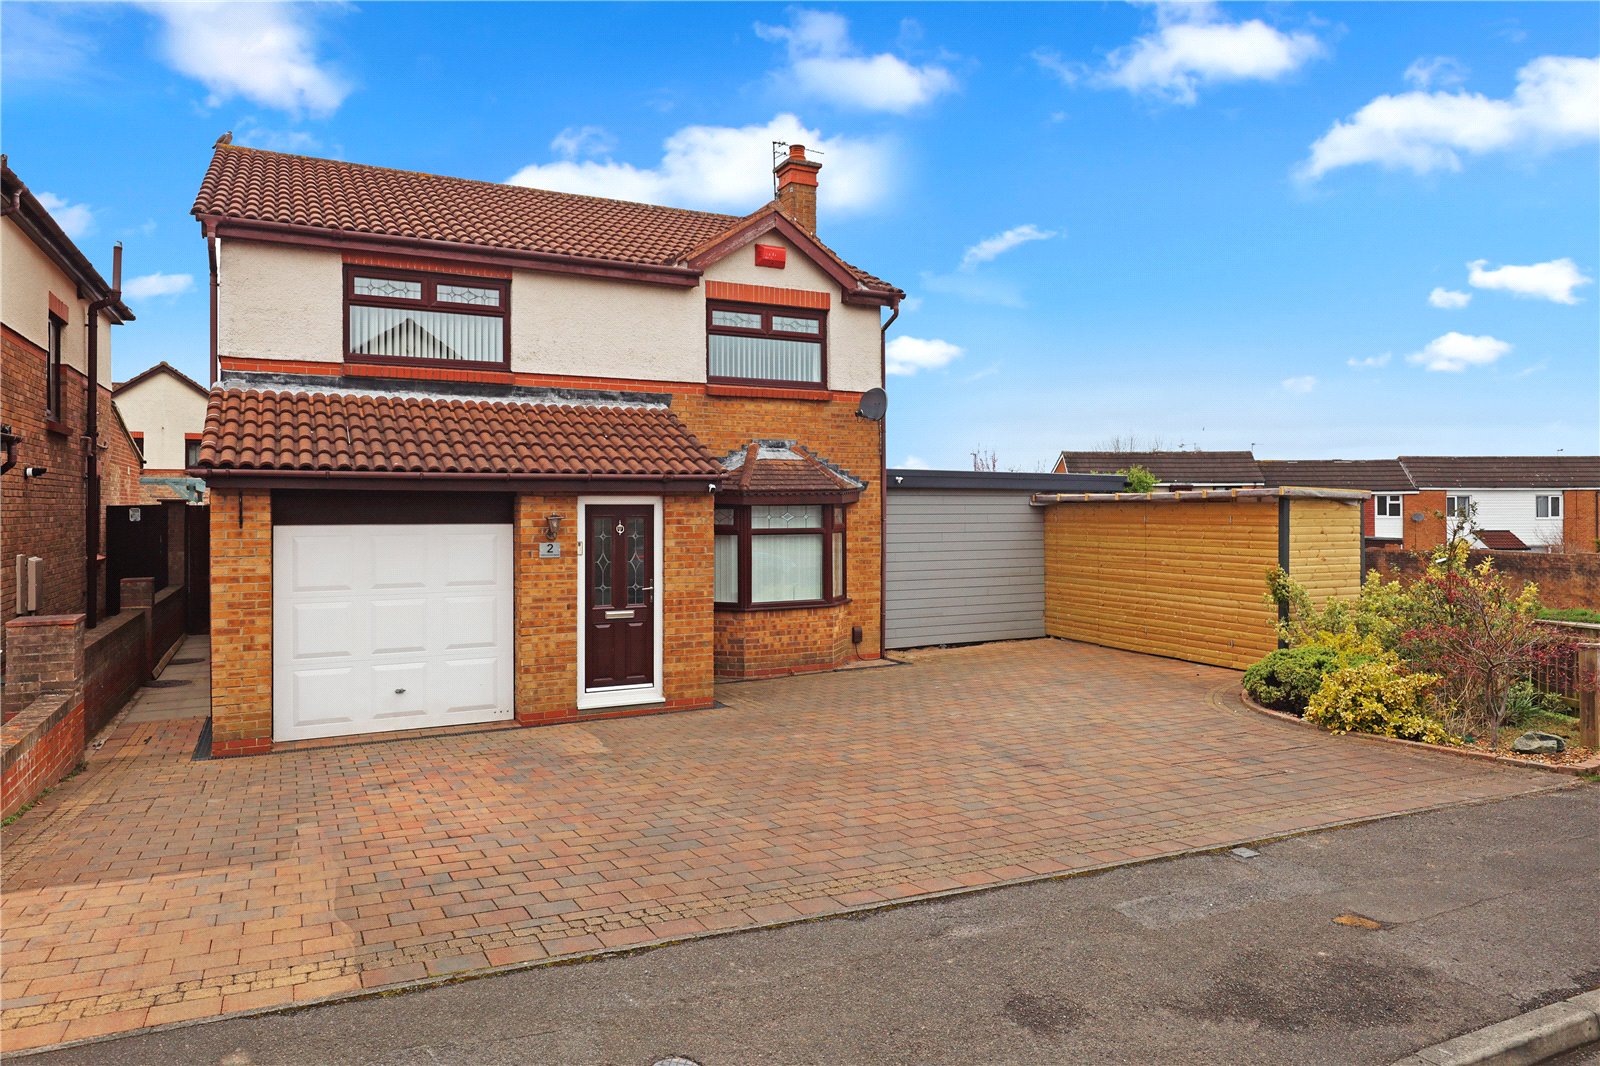 4 bed house for sale in Endeavour Drive, Ormesby - Property Image 1